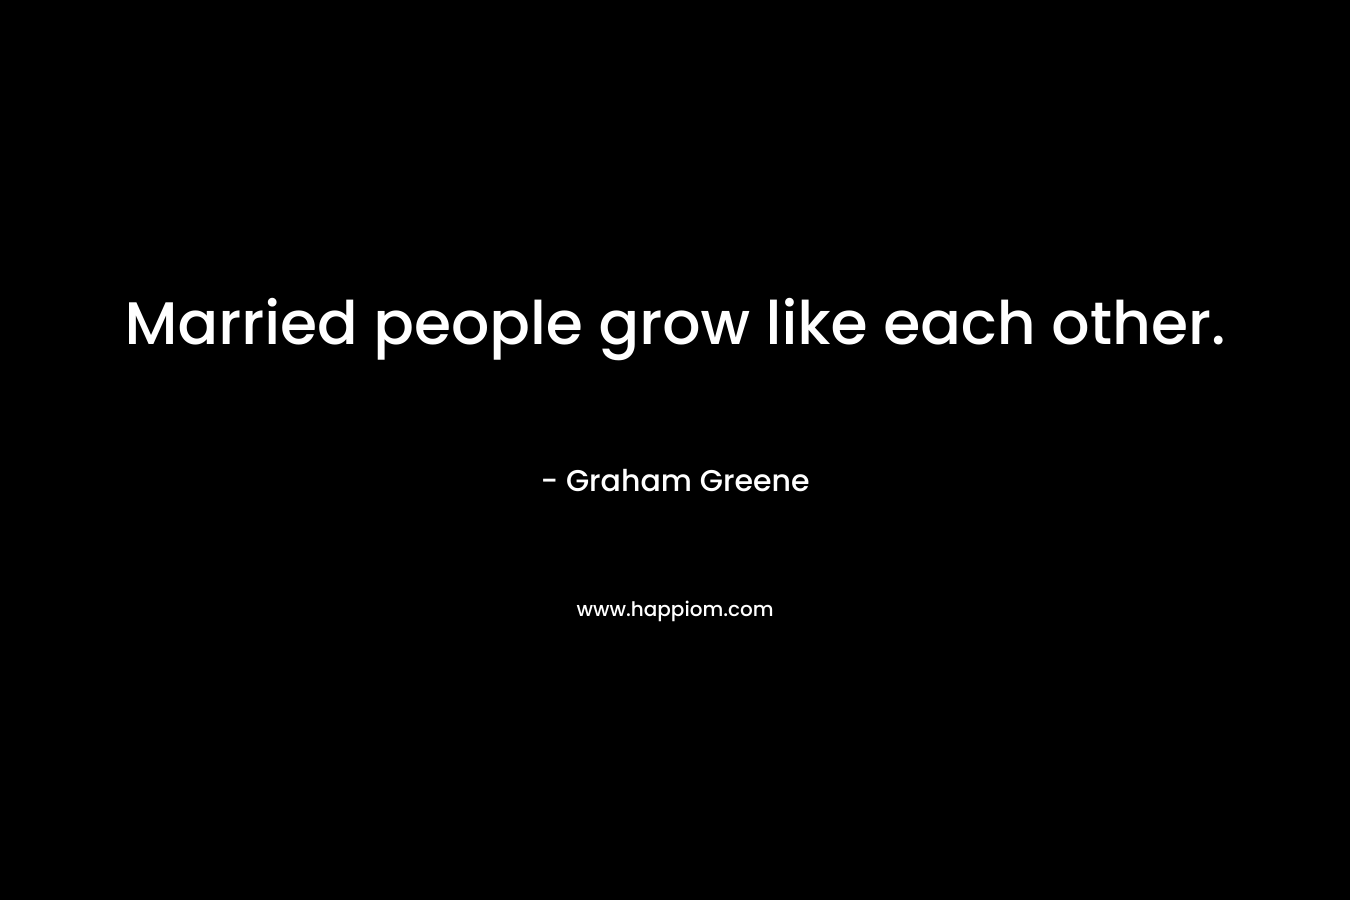 Married people grow like each other.